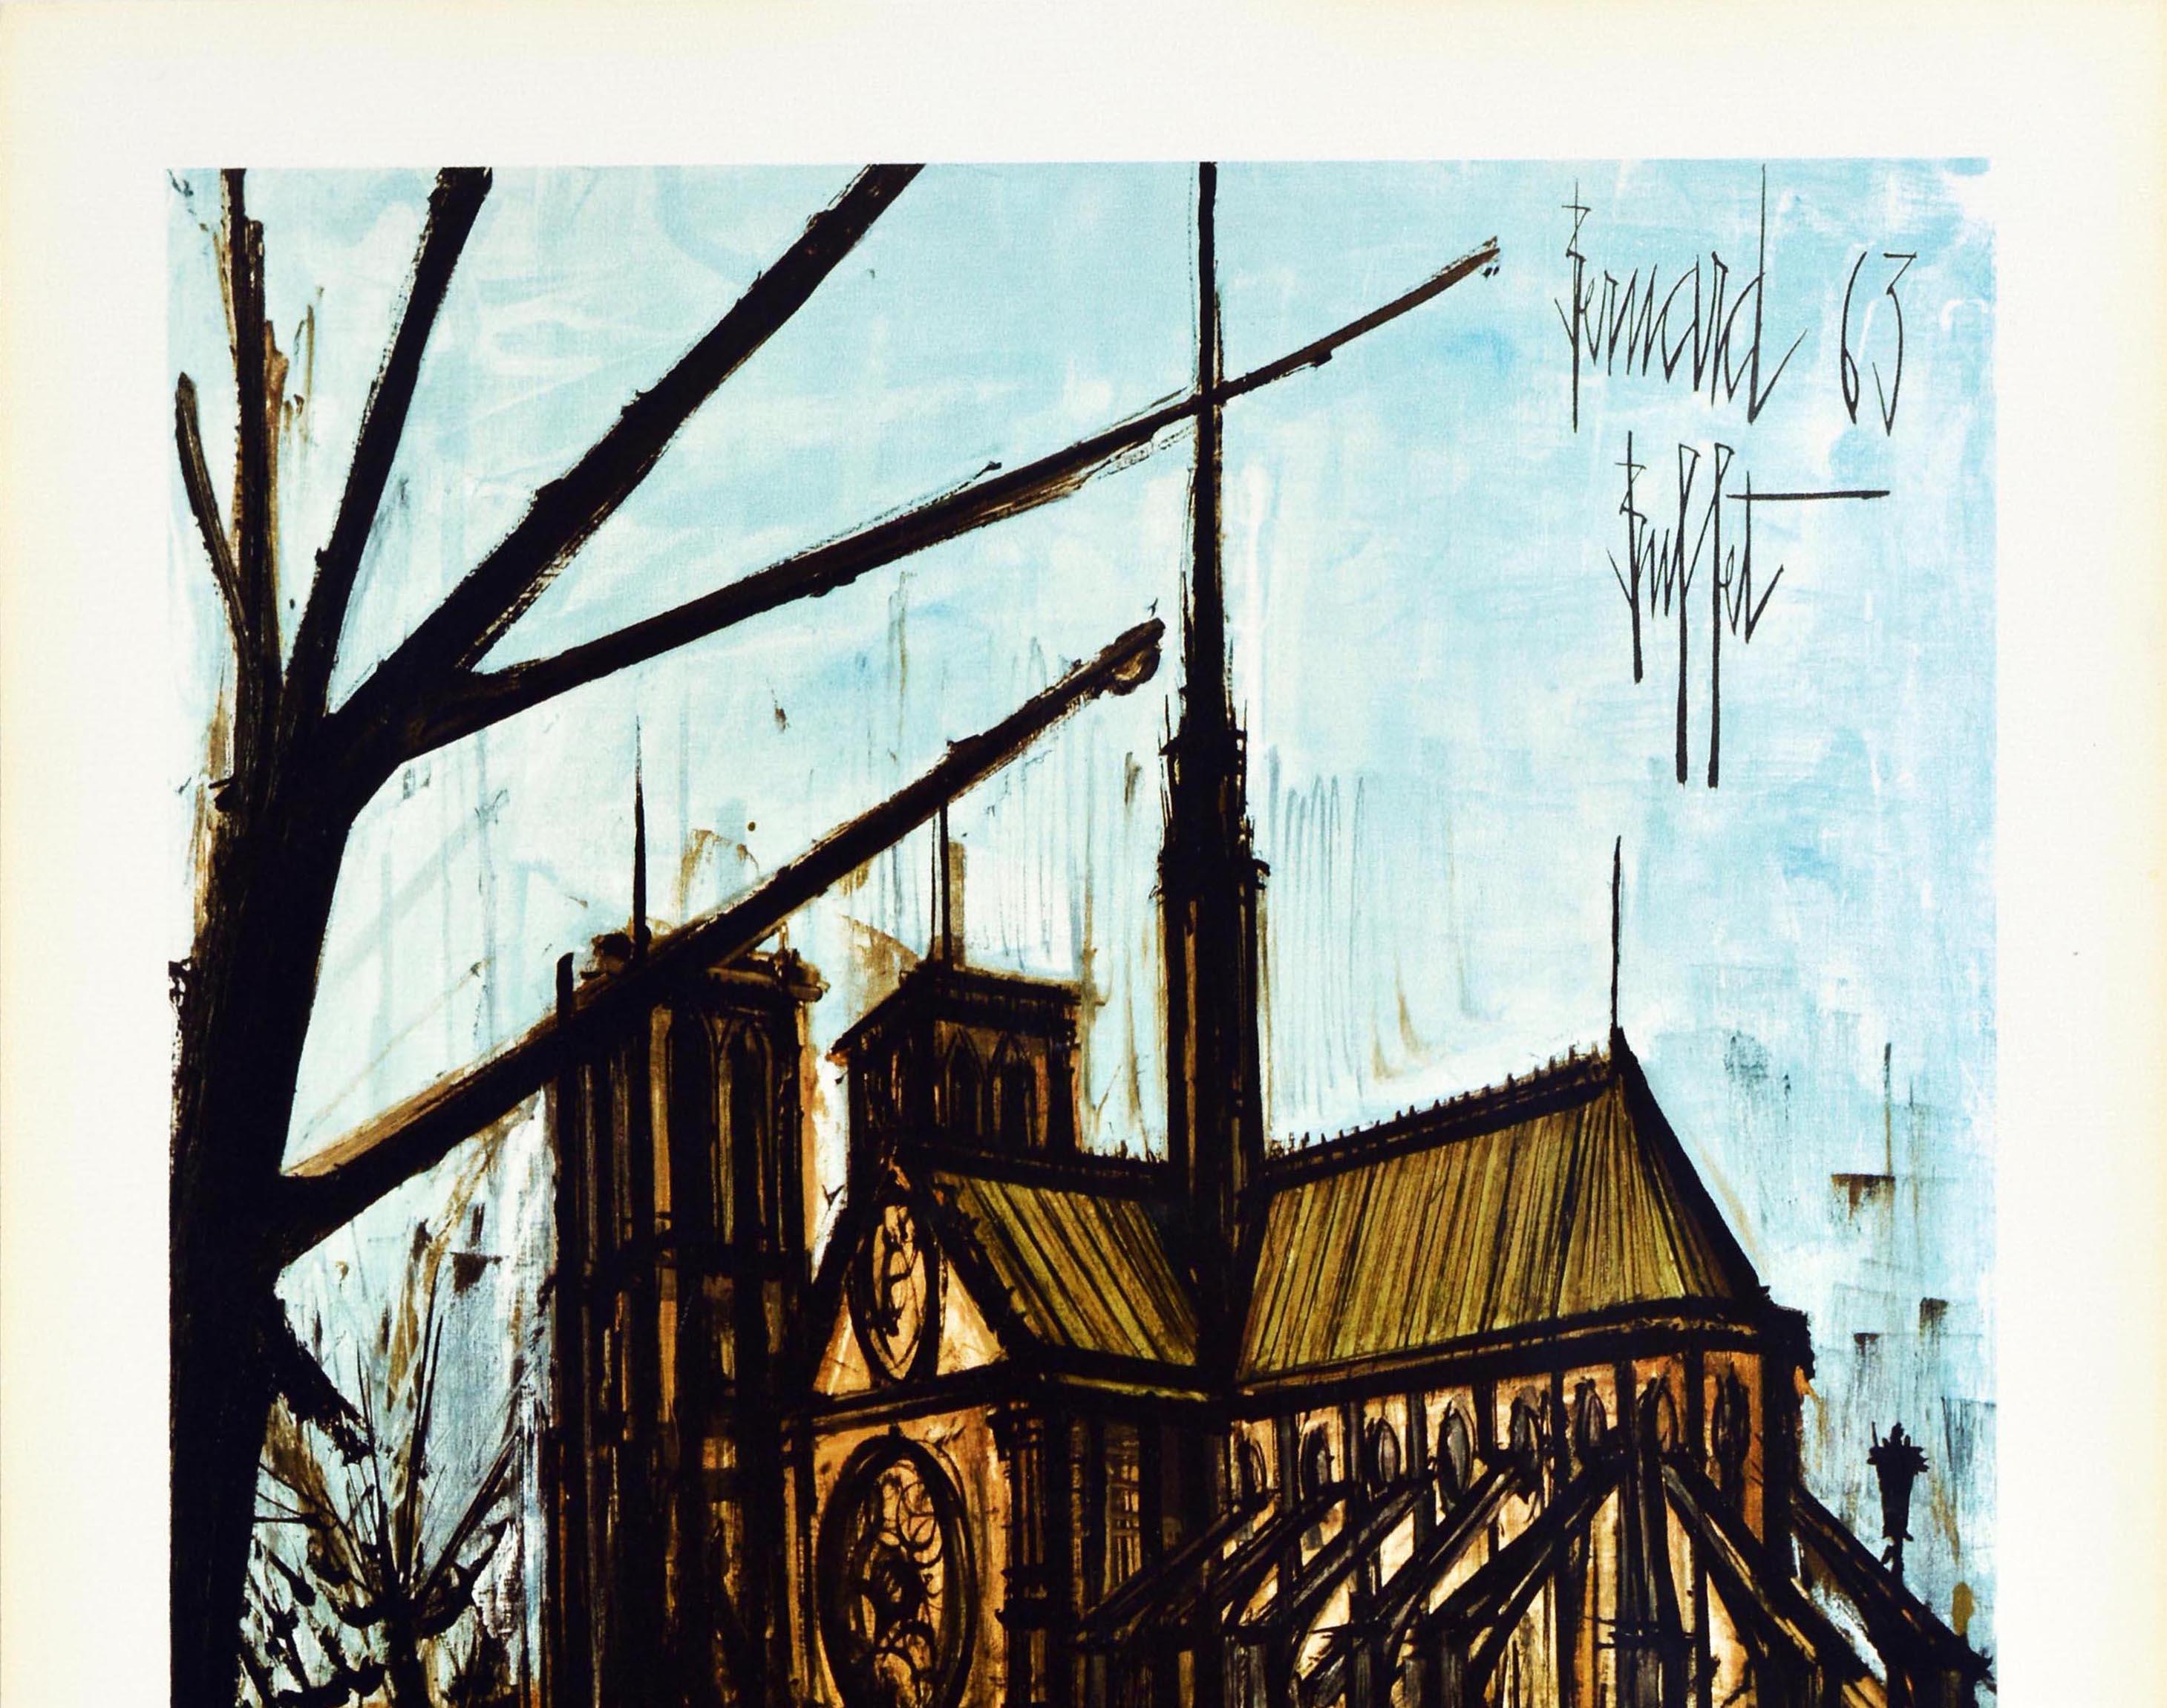 Original vintage travel poster for Paris Franzosische Eisenbahnen / French Railways featuring great artwork by the notable French expressionist painter Bernard Buffet (1928-1999) depicting the historic medieval Notre Dame cathedral on the Ile de la